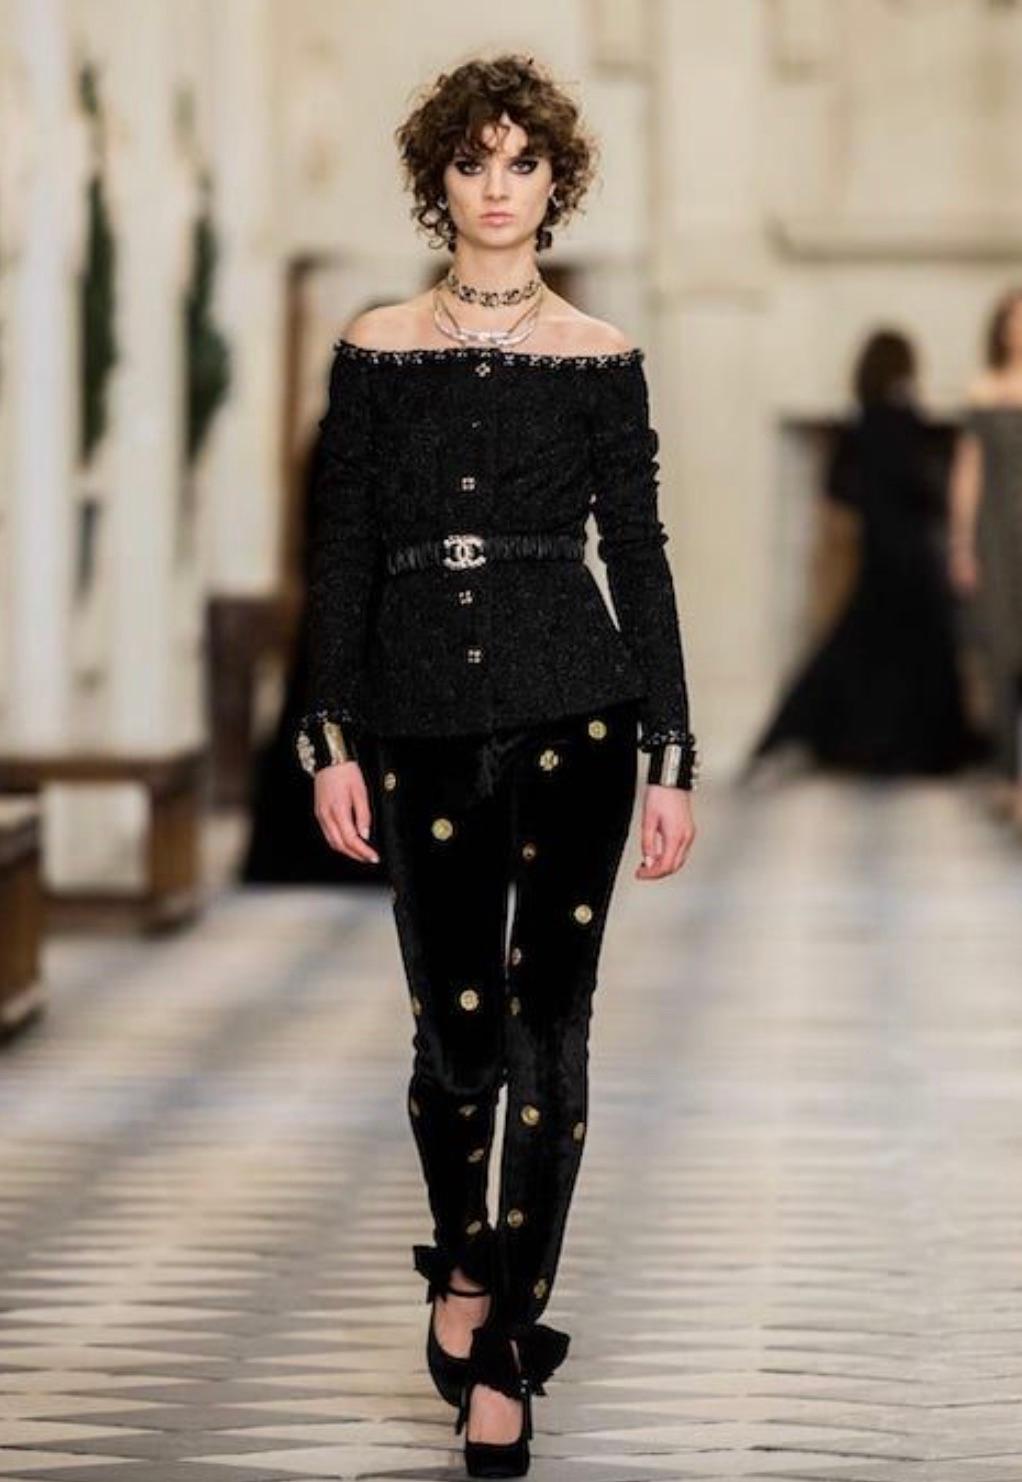 The little black jacket from CHANEL's Fall/Winter 2021 Métiers d'art 'Le Château des Dames' collection is a coveted fashion piece that has gained immense popularity. Embraced by celebrities and fashion bloggers, it has graced the pages of top